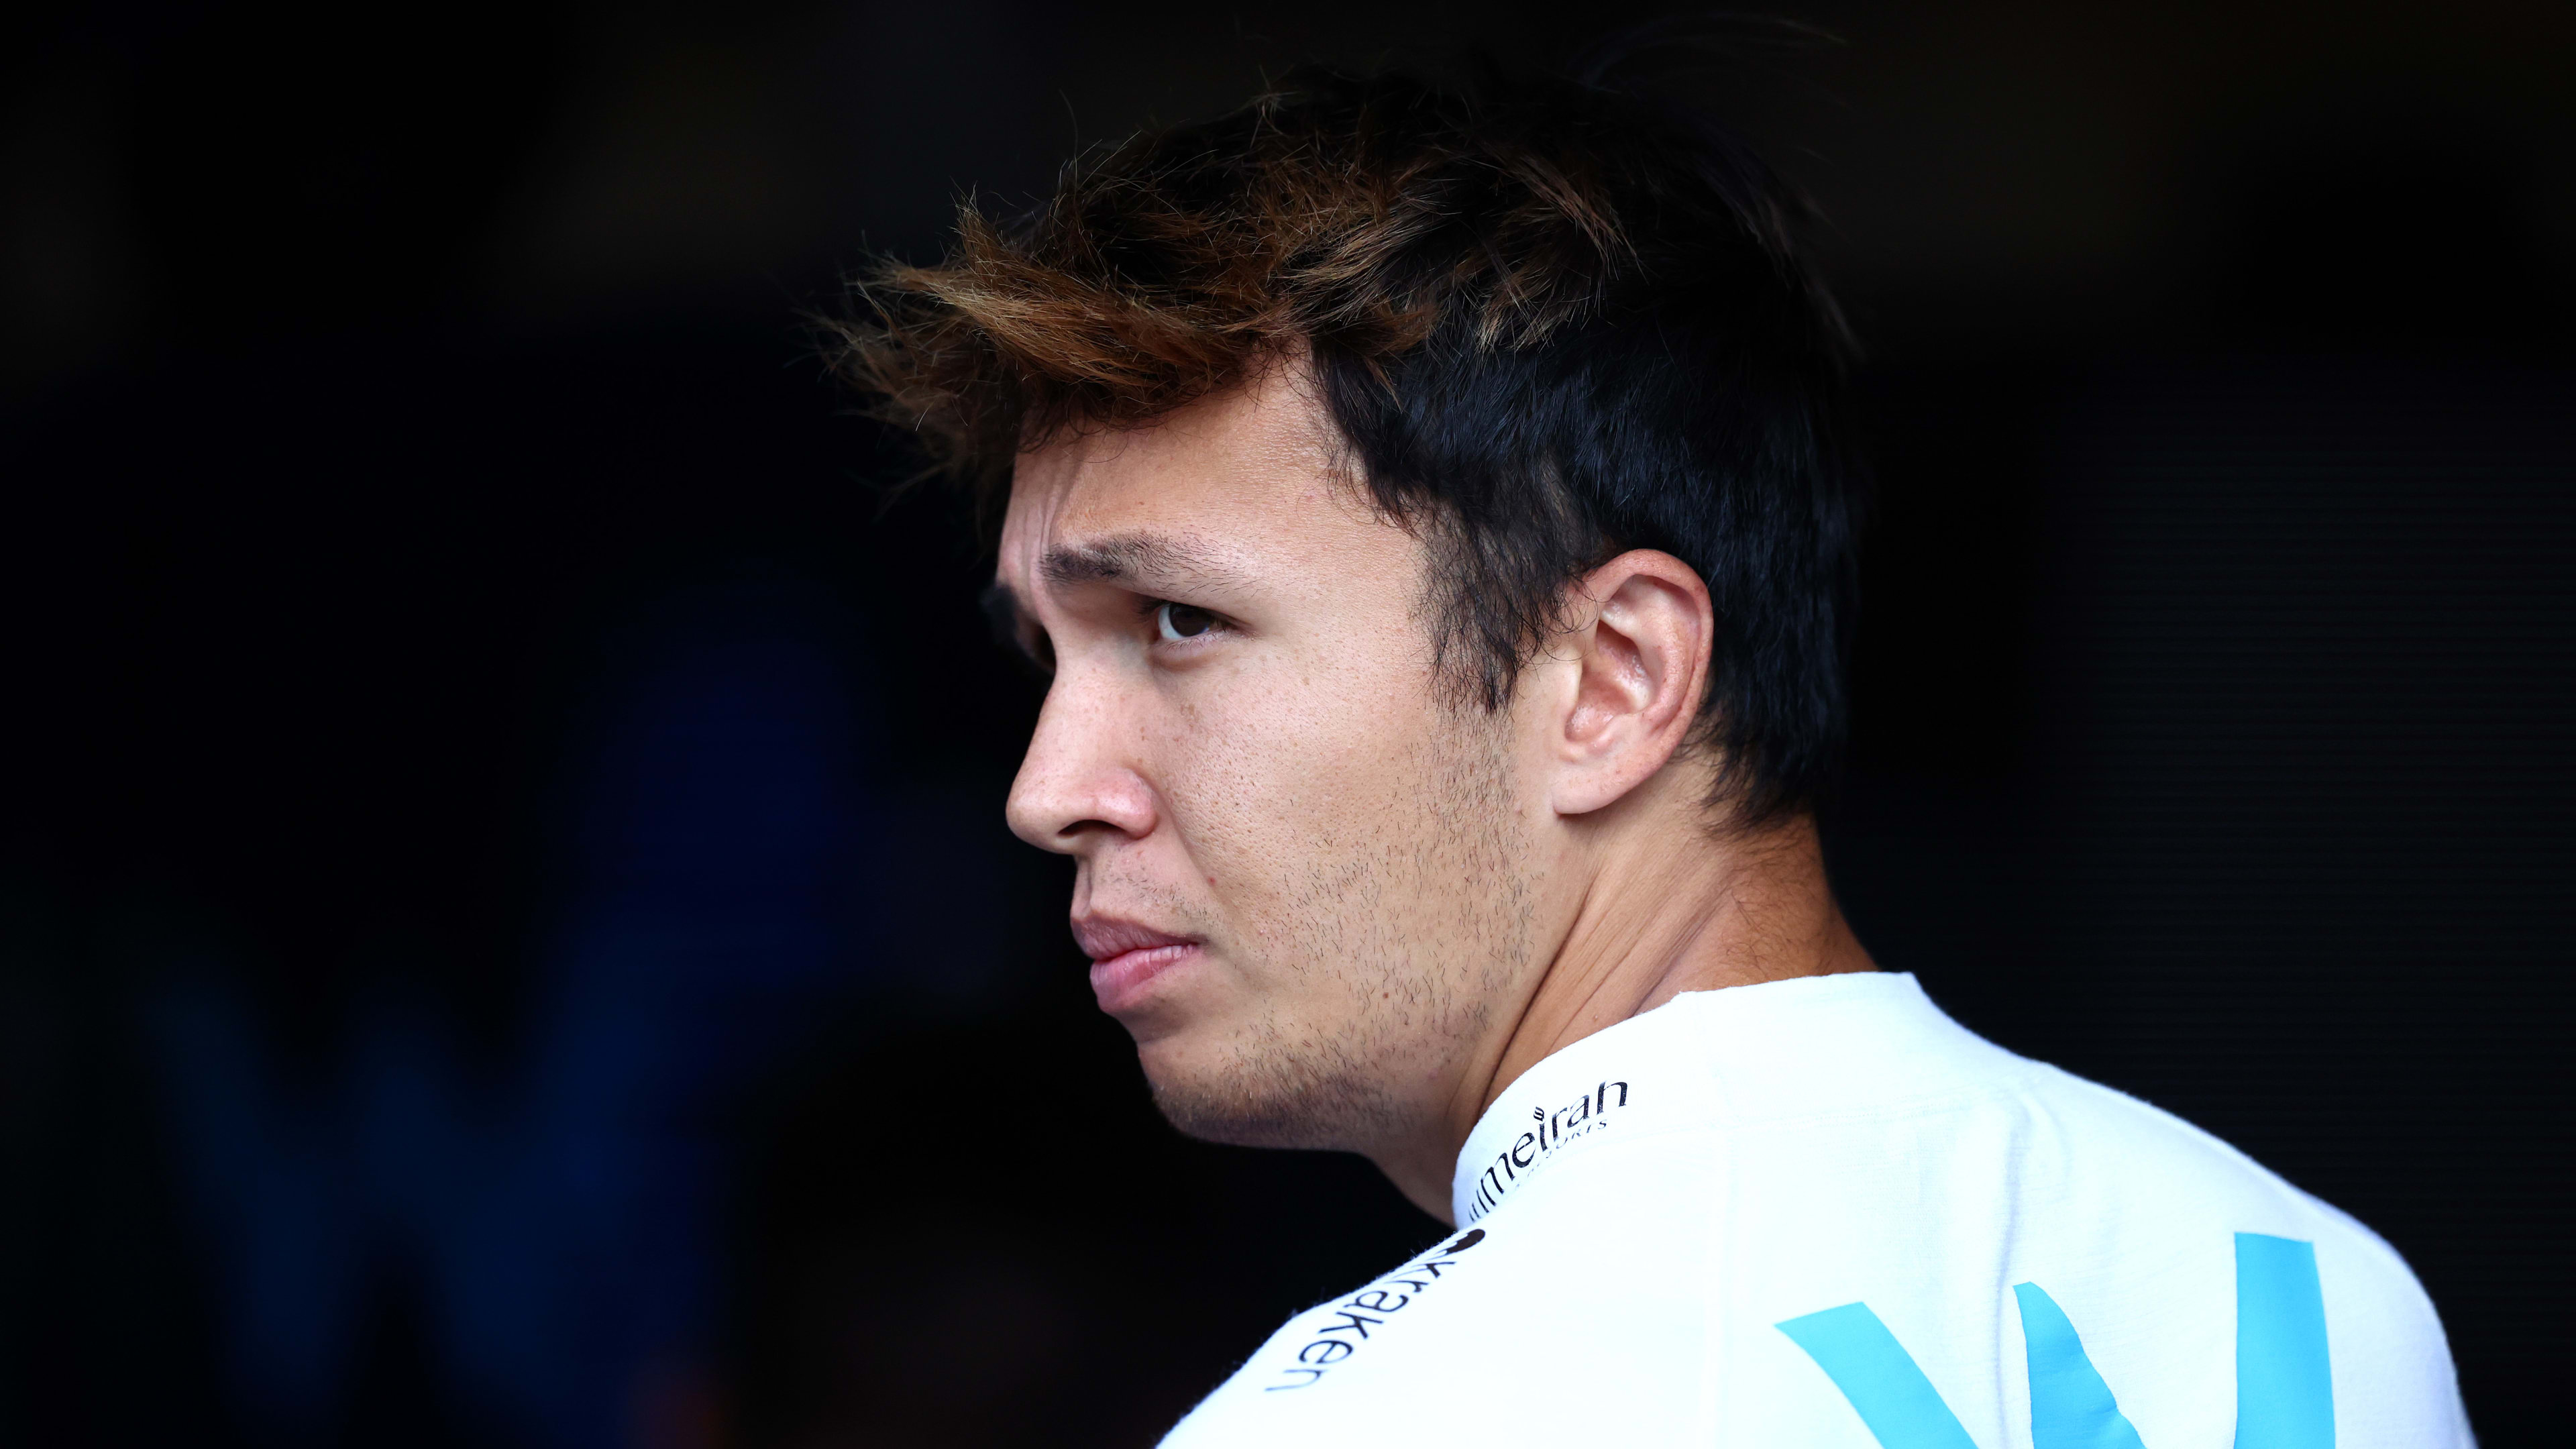 MONZA, ITALY - SEPTEMBER 02: Alexander Albon of Thailand and Williams looks on during qualifying